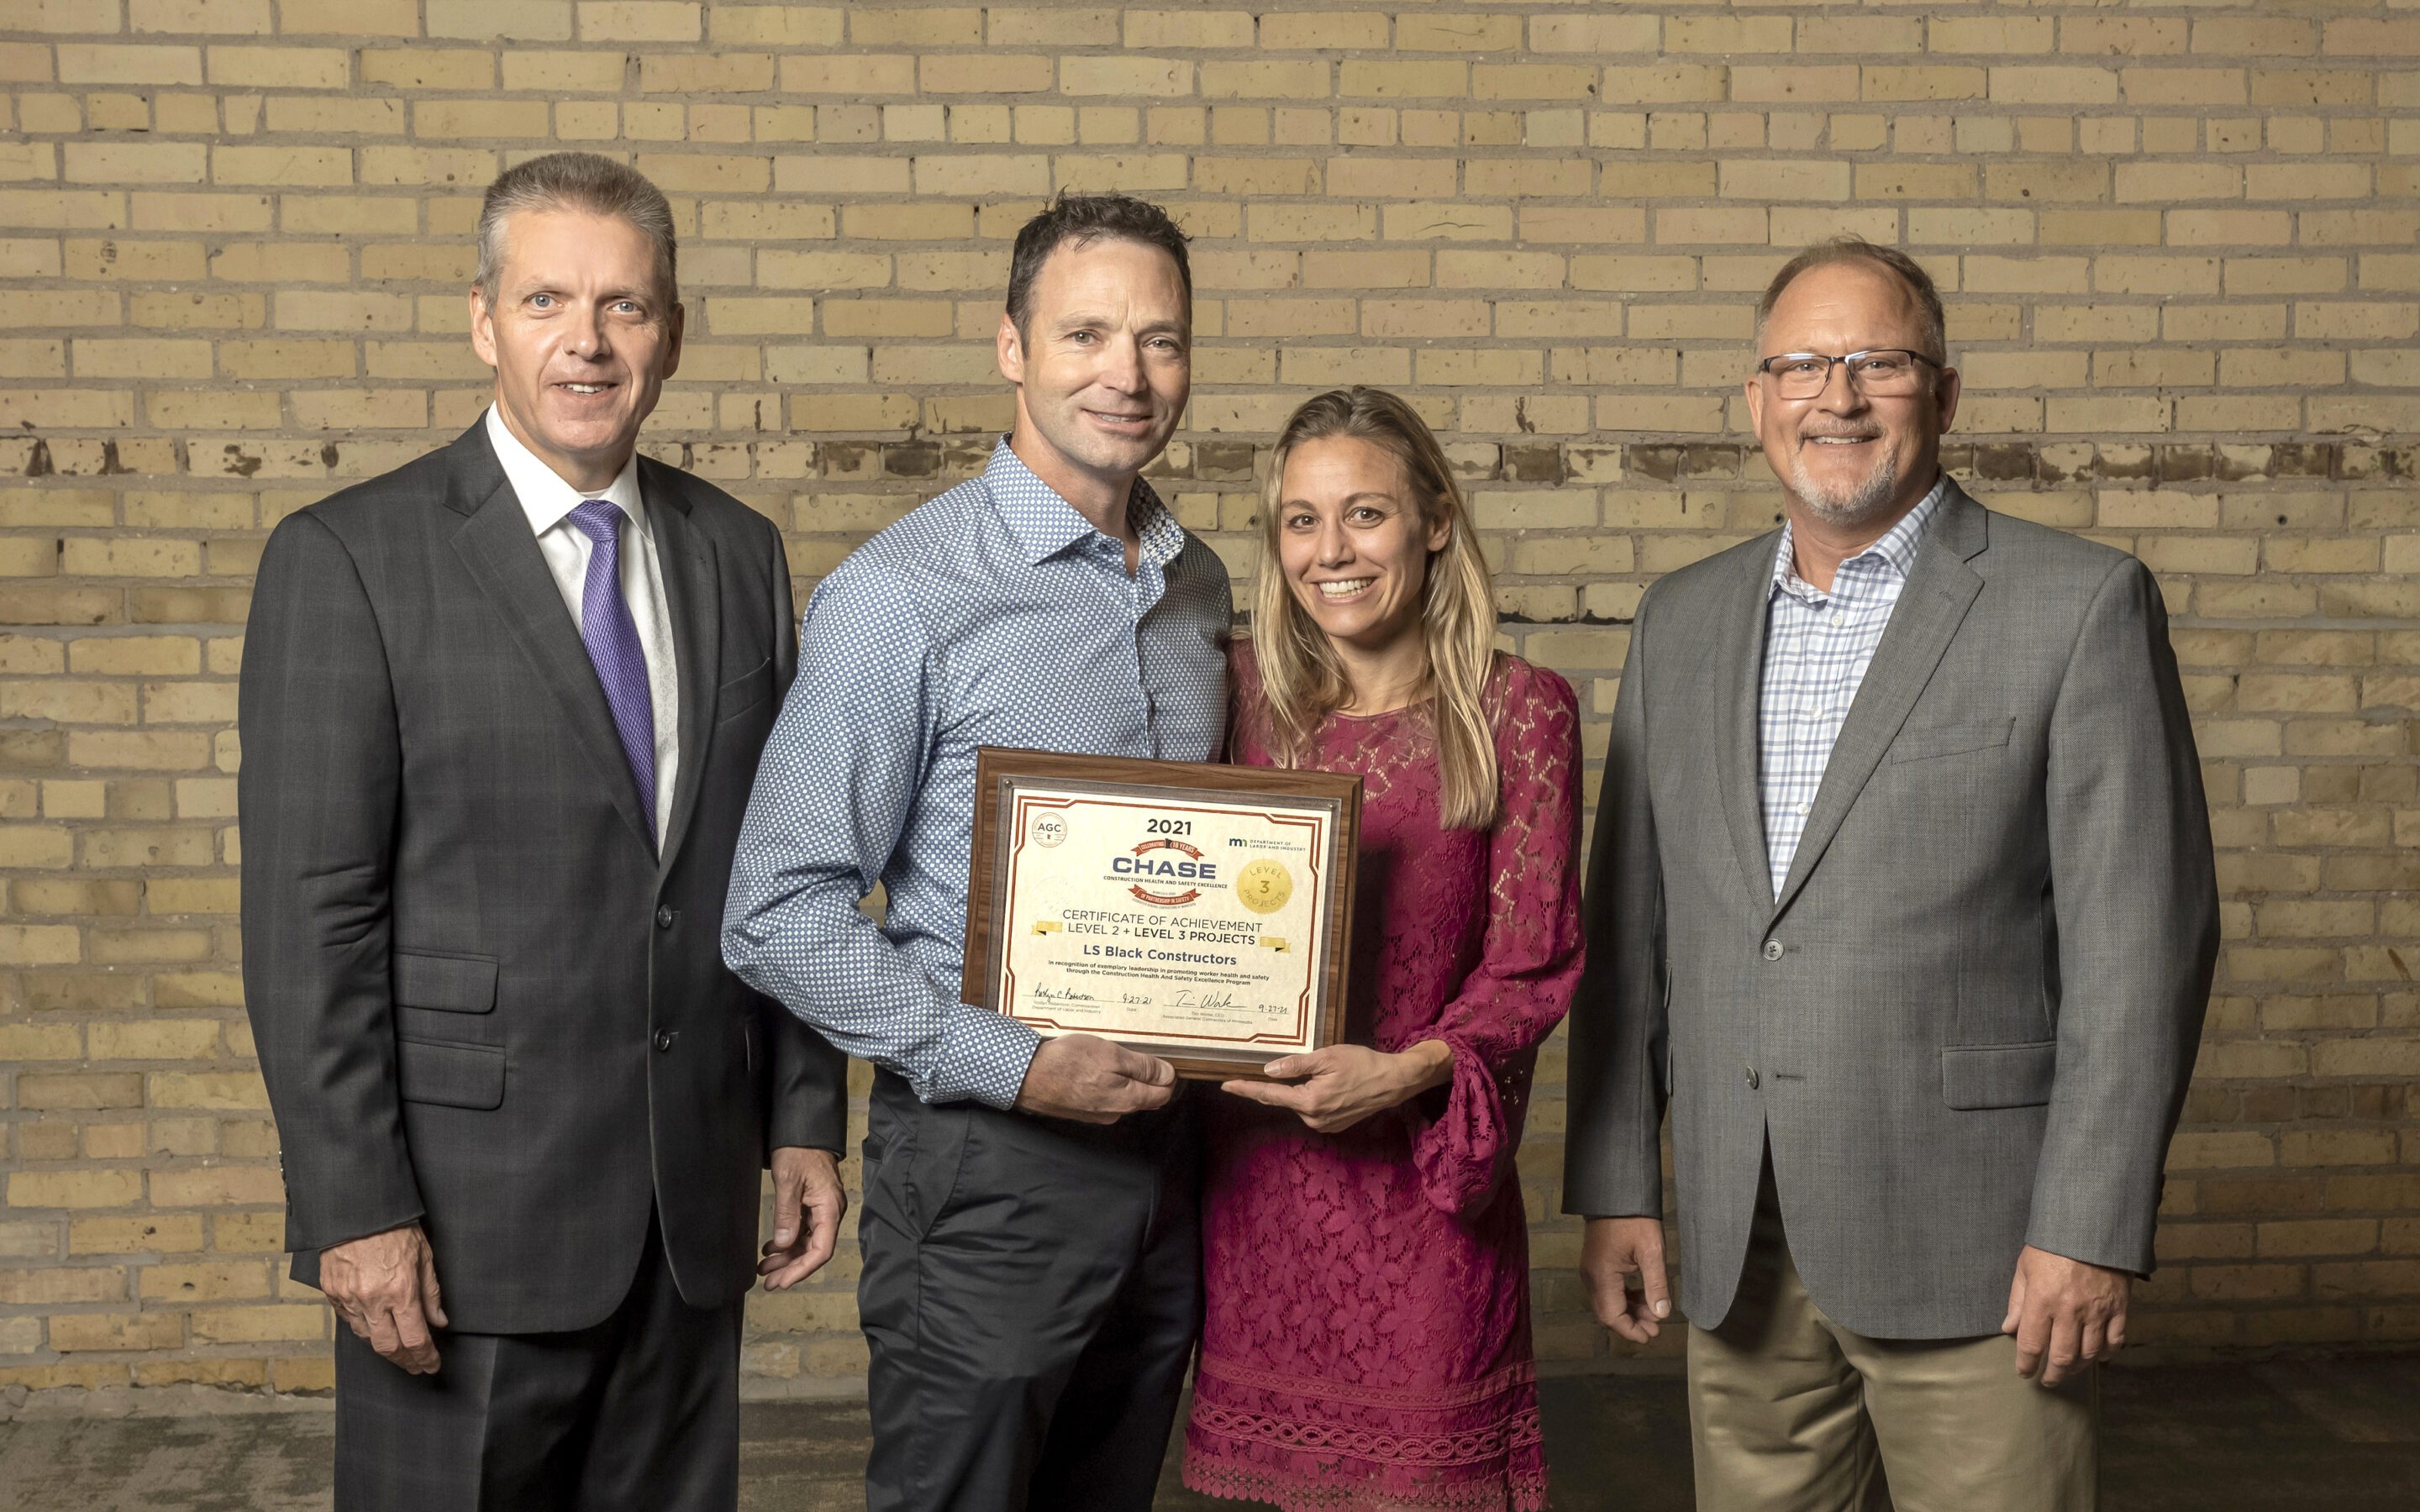 LS Black Receives 2021 AGC CHASE Safety Award